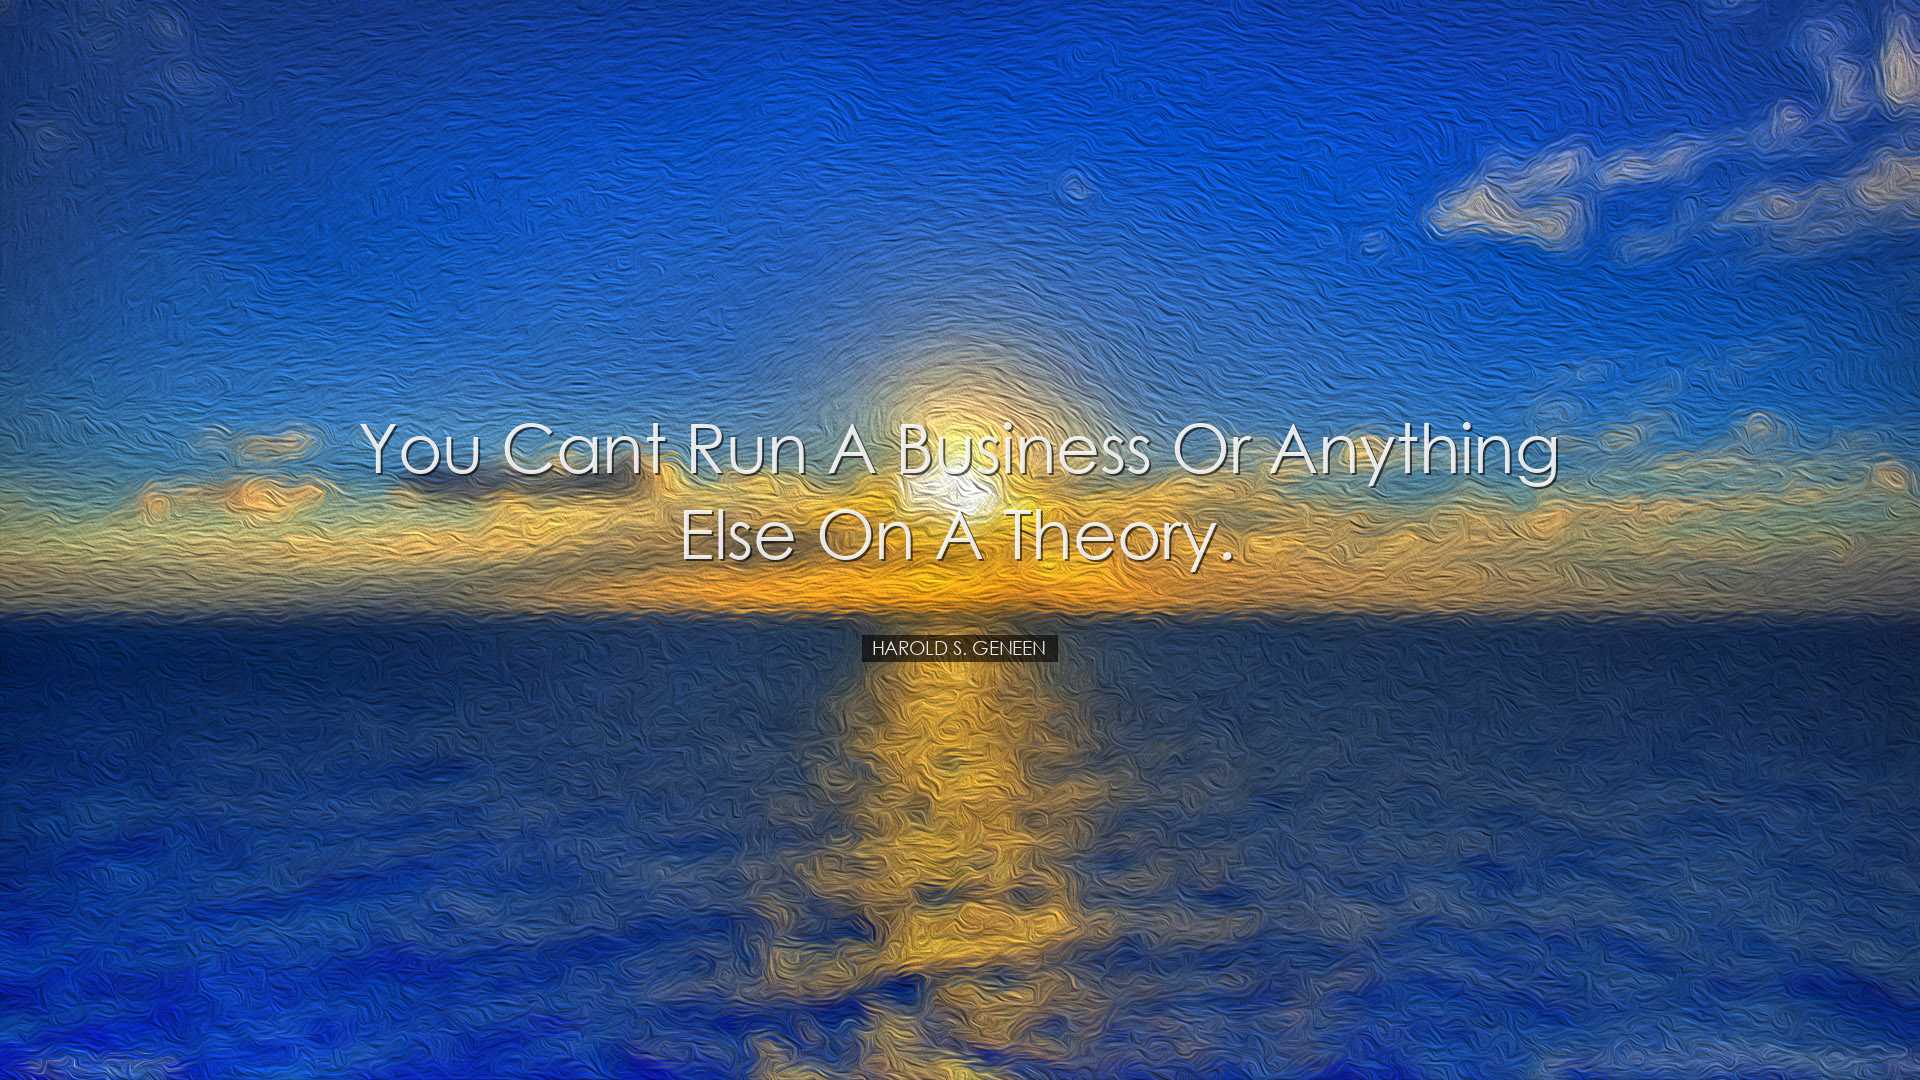 You cant run a business or anything else on a theory. - Harold S.